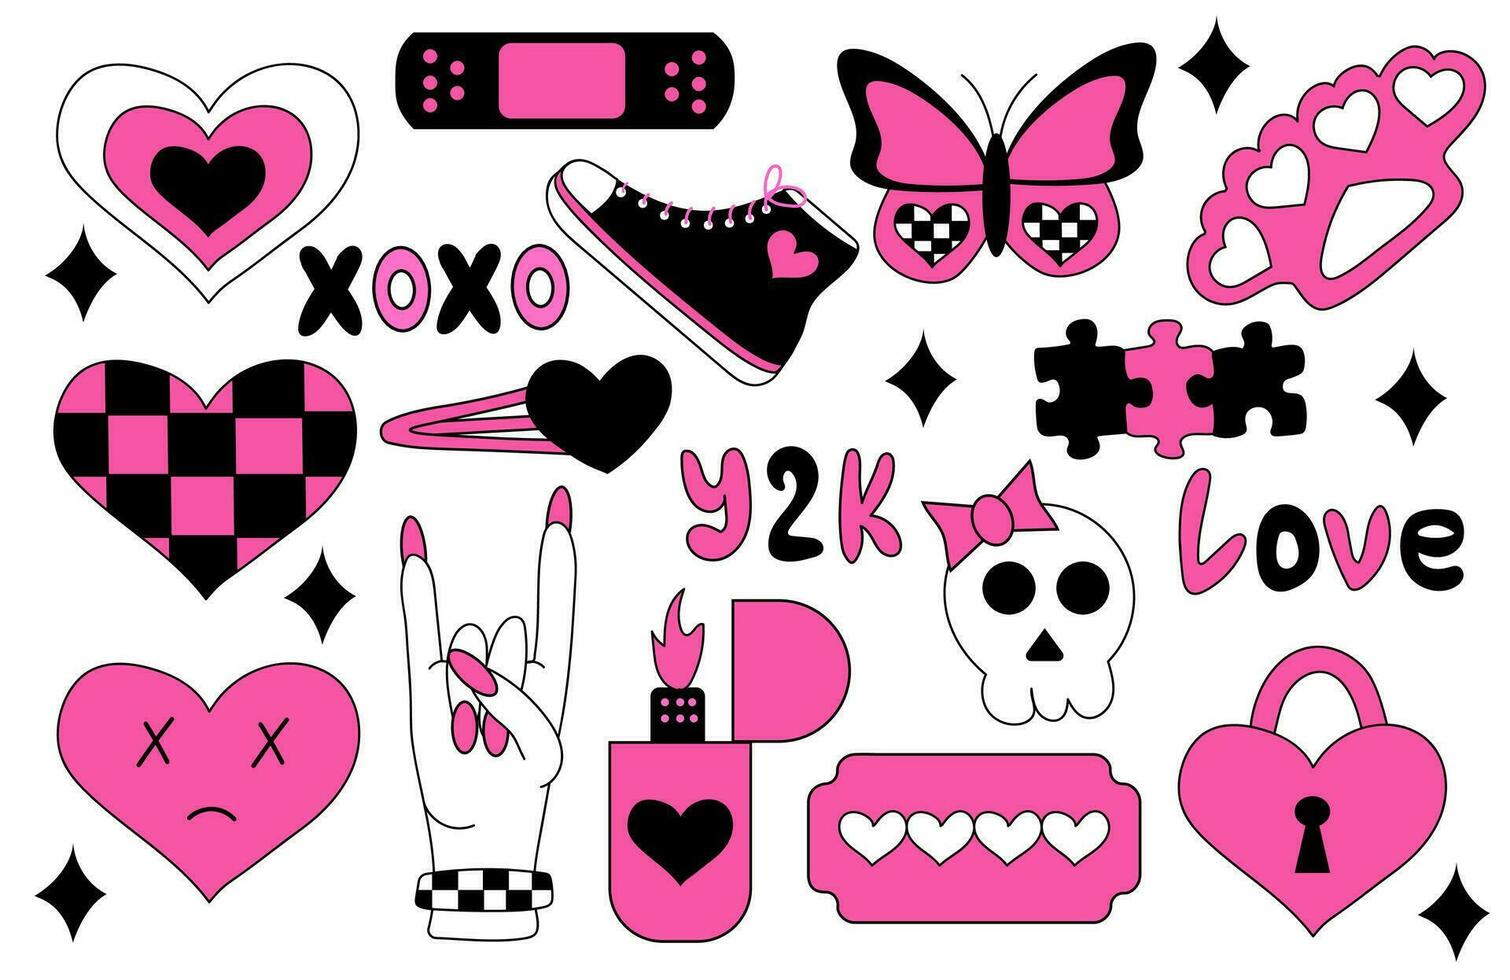 Set of emo elements. Y2k style. Hearts in chessboard, blade, hairpin, brass knuckles, rock sign, sneakers, butterfly, skull, lighter. Black and pink. Vector flat illustration.